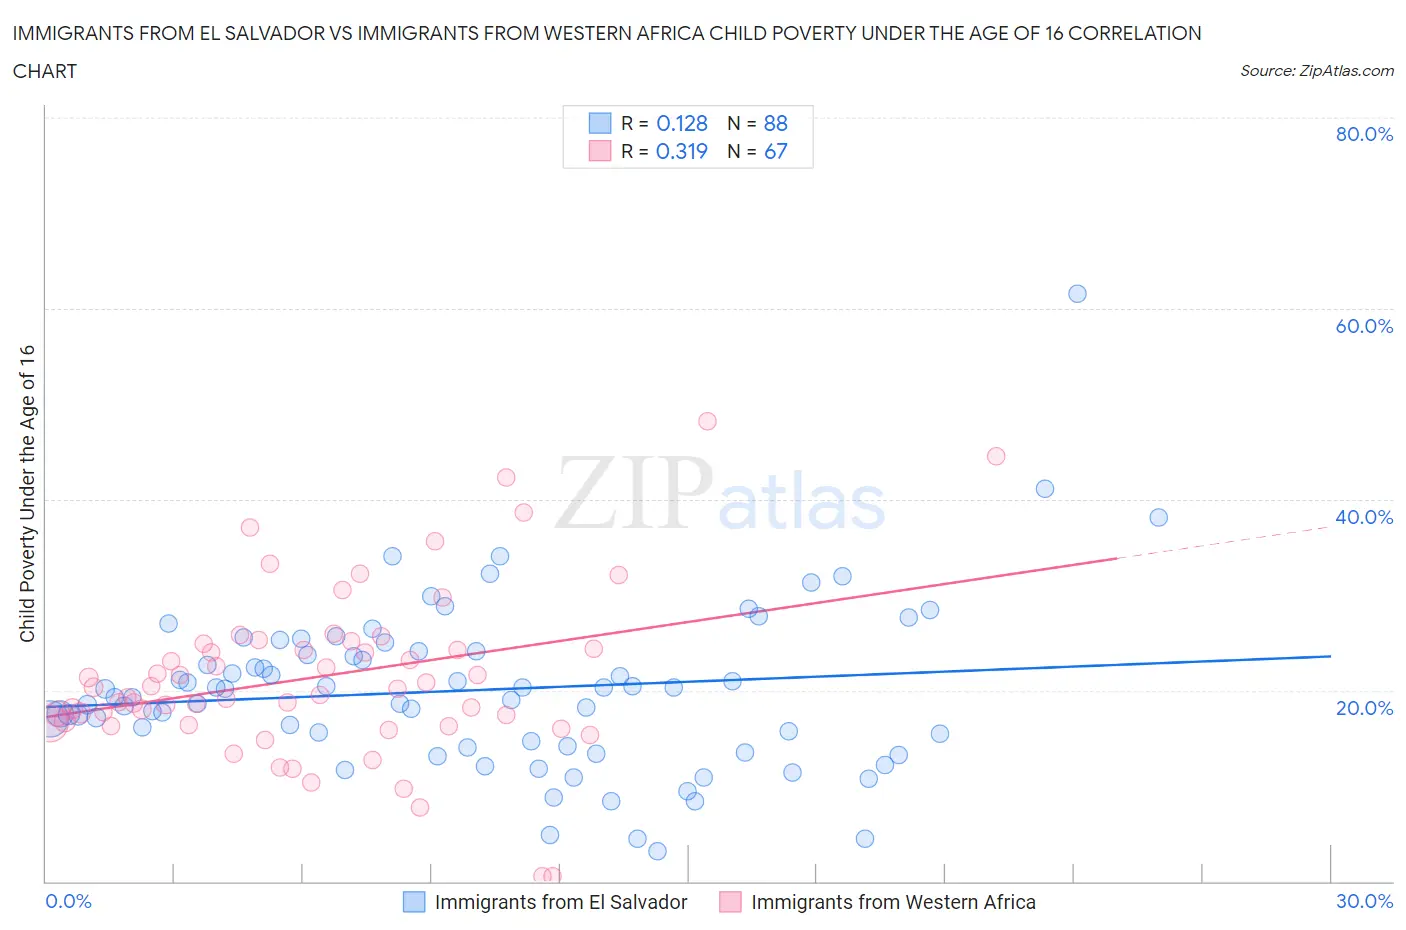 Immigrants from El Salvador vs Immigrants from Western Africa Child Poverty Under the Age of 16